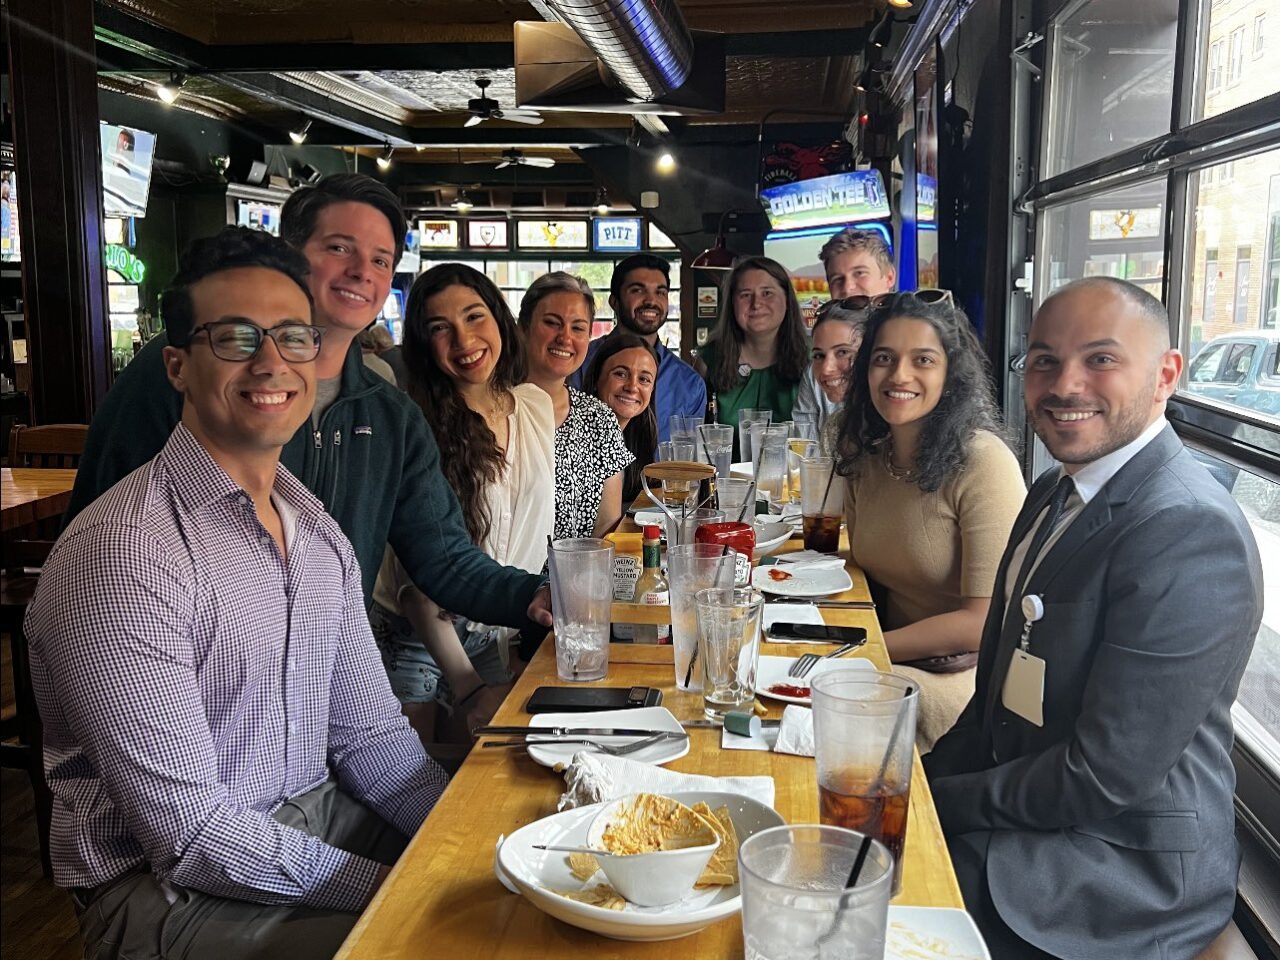 Ria Mulherkar: First happy hour of the year with our new PGY-2s, our new physics residents, and our rotating med students!